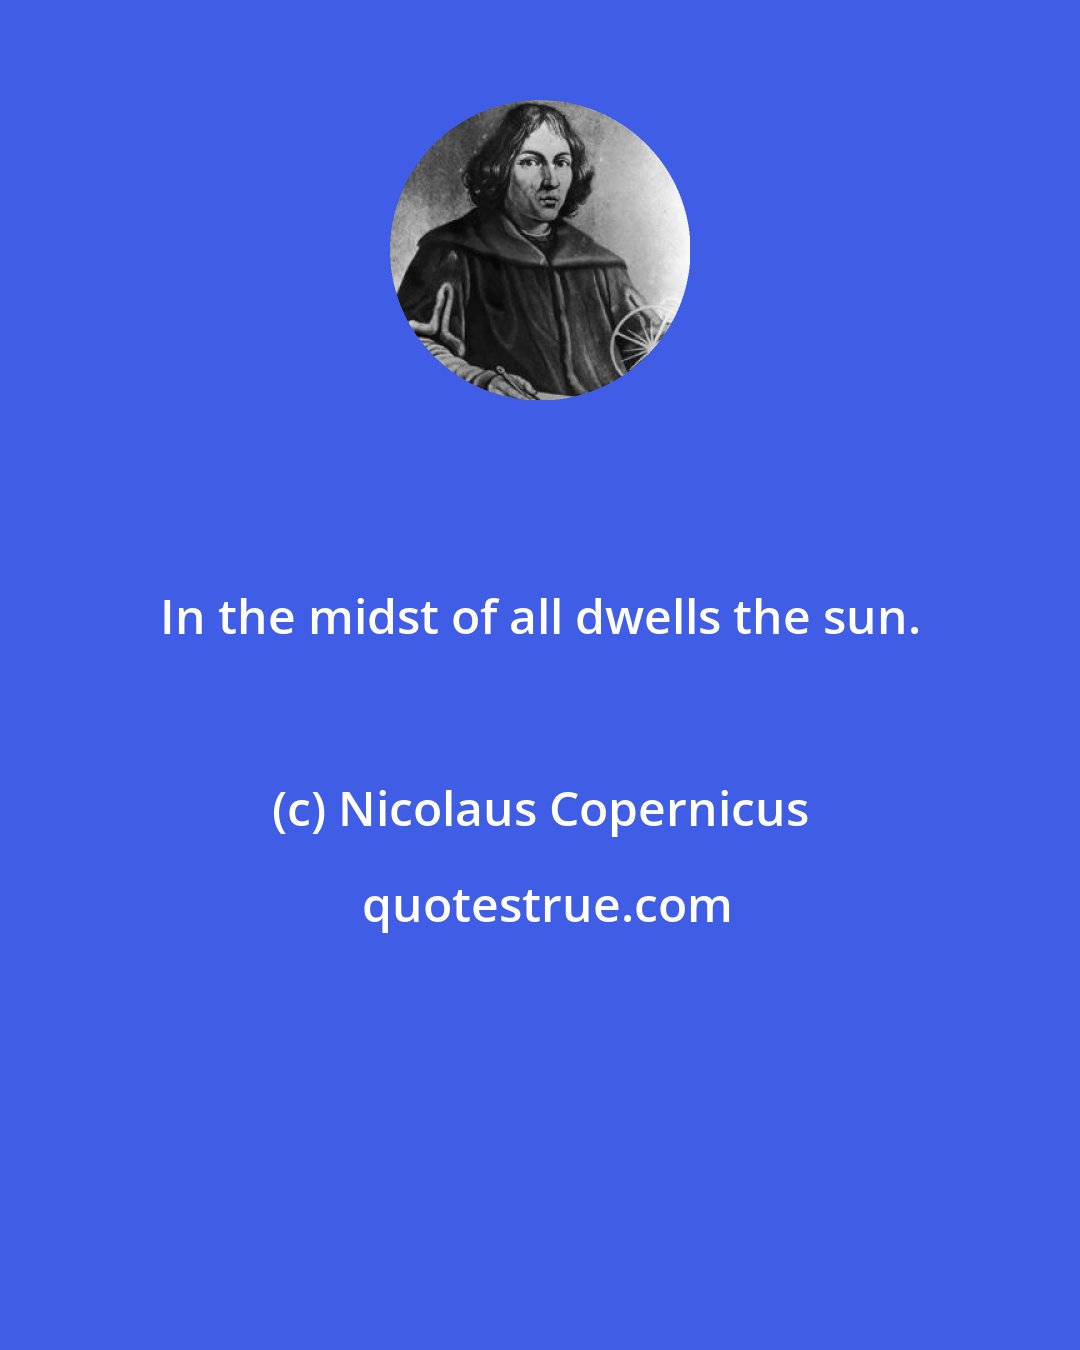 Nicolaus Copernicus: In the midst of all dwells the sun.